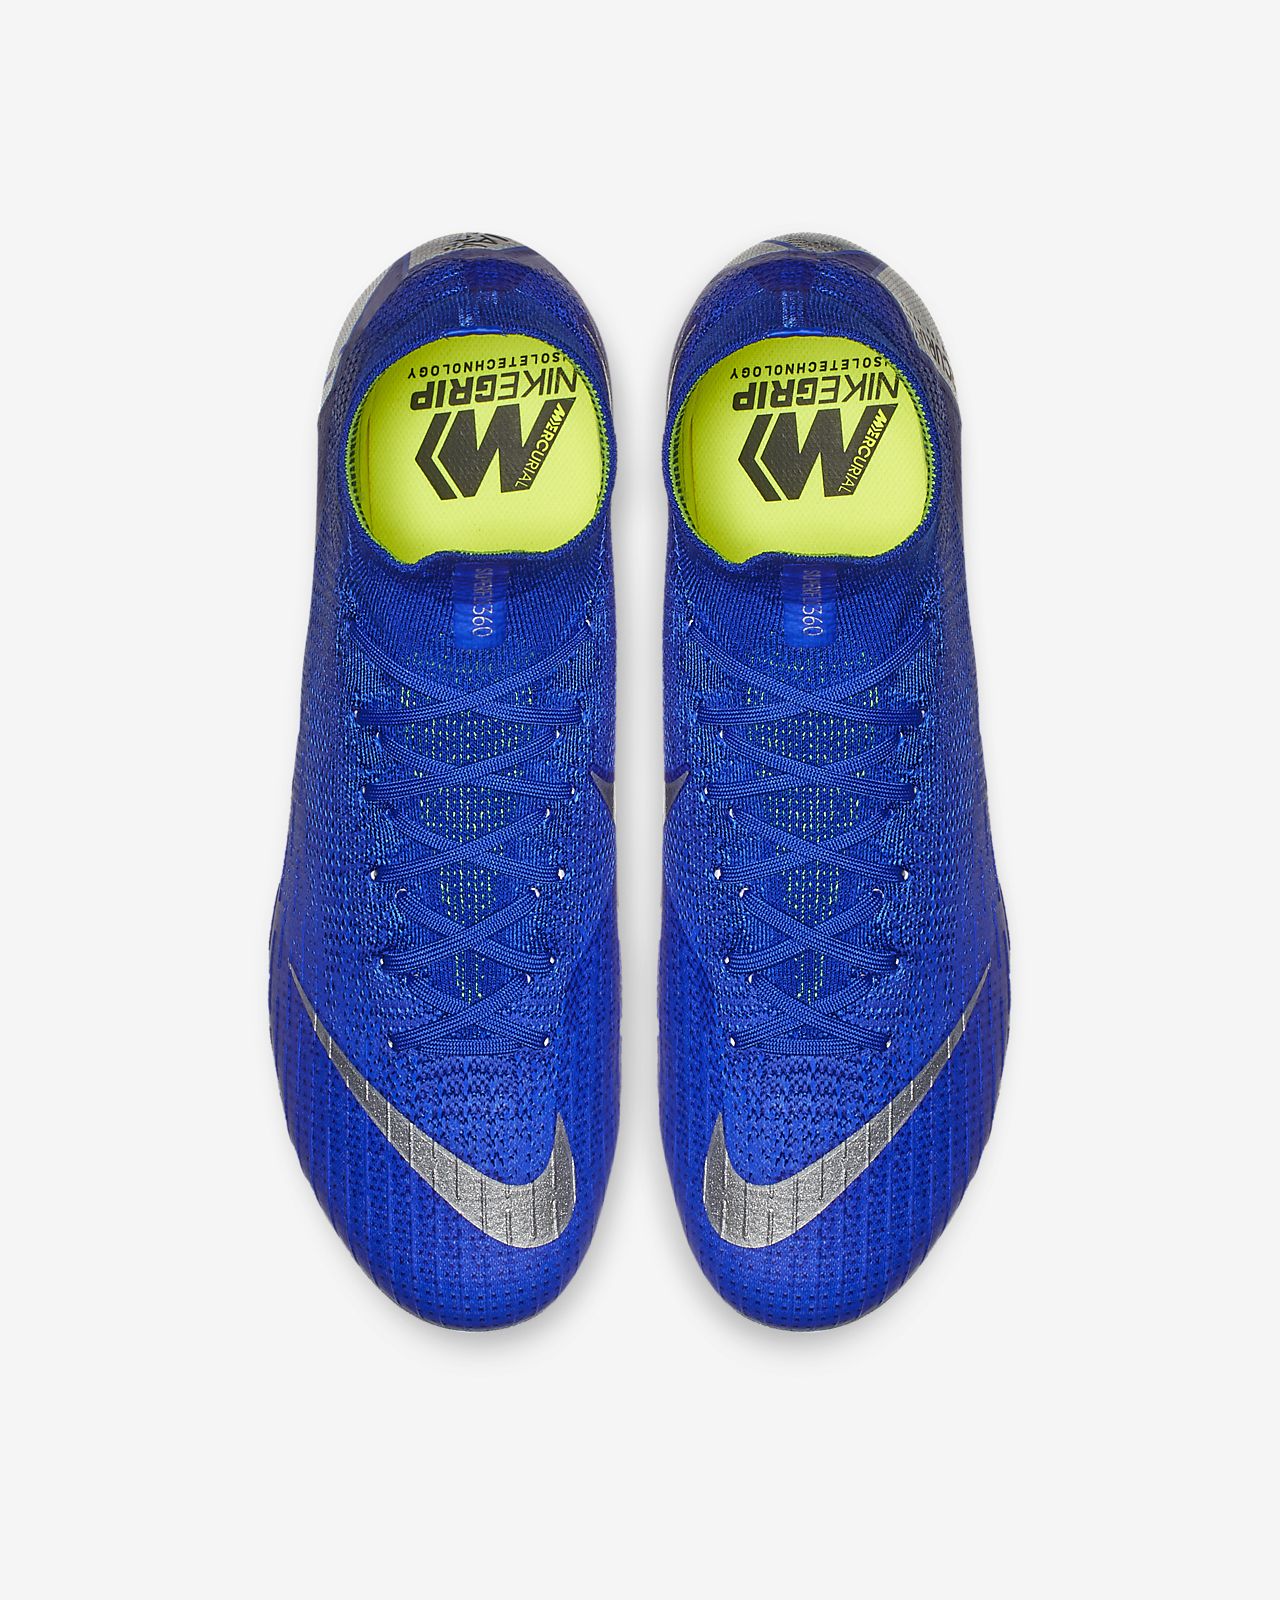 Nike Mercurial Superfly VI Pro Firm Ground